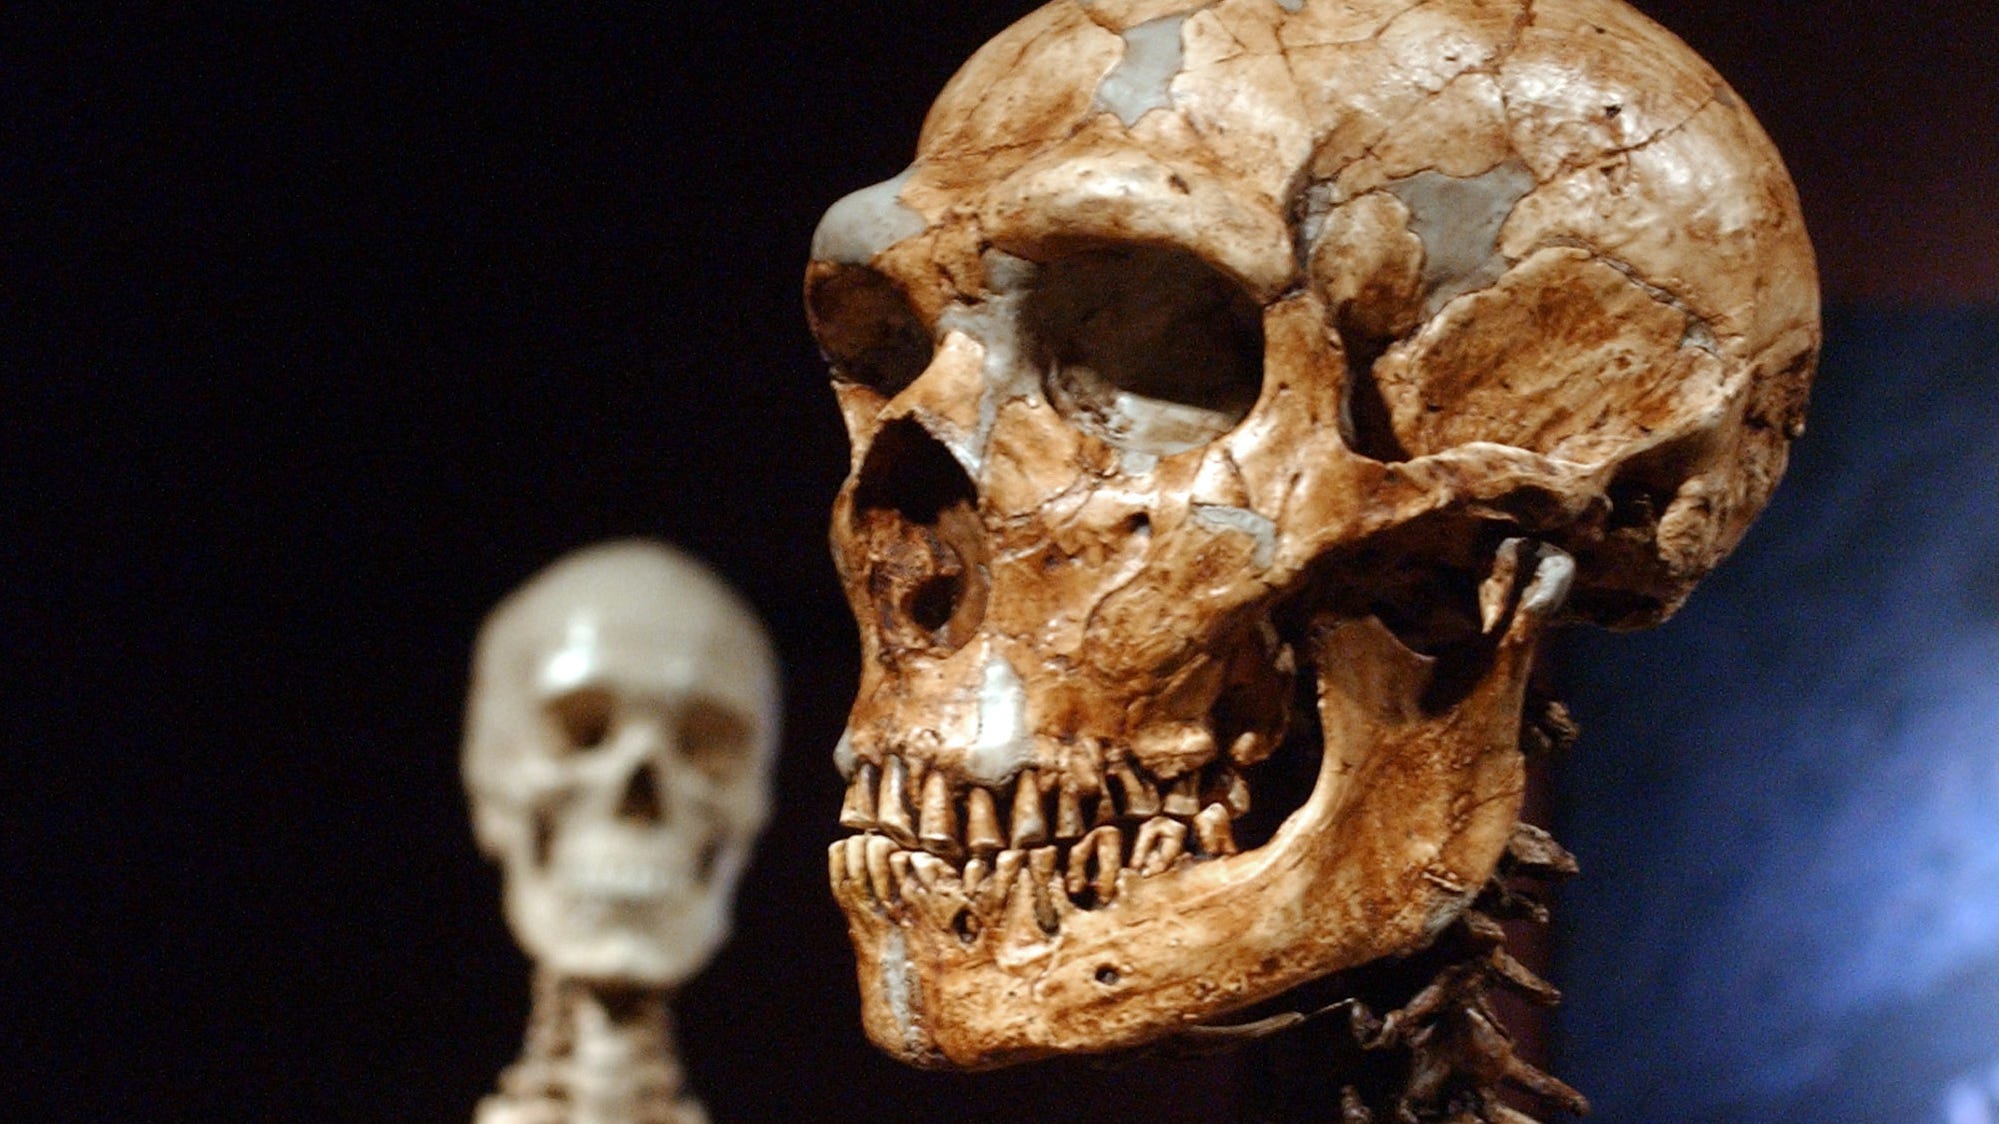 Fact check: Post showing giant human skeletons is an old hoax